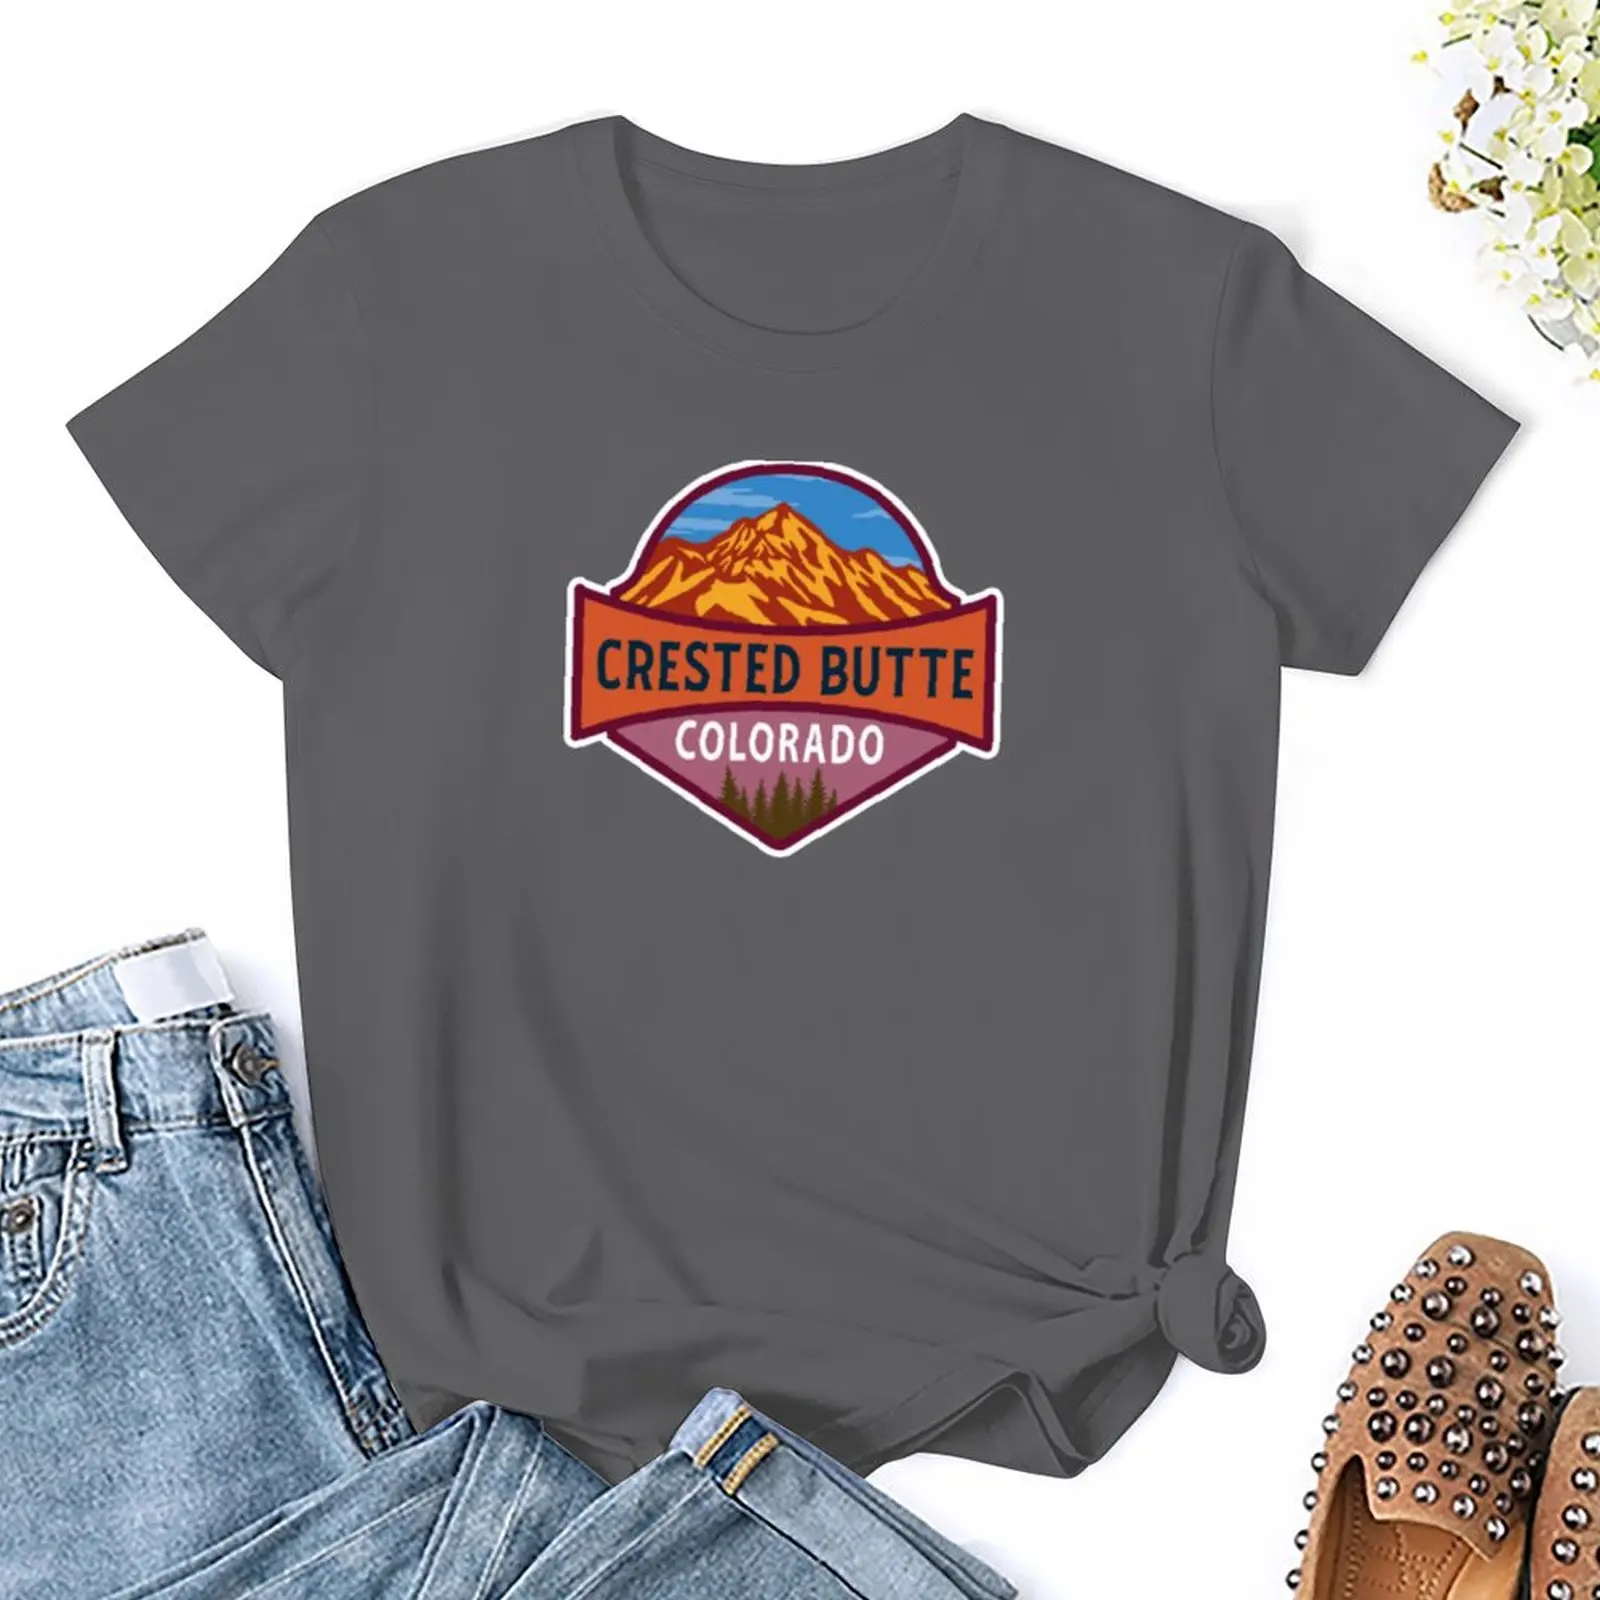 Crested Butte Colorado T-shirt cute tops aesthetic clothes shirts graphic tees cropped t shirts for Women